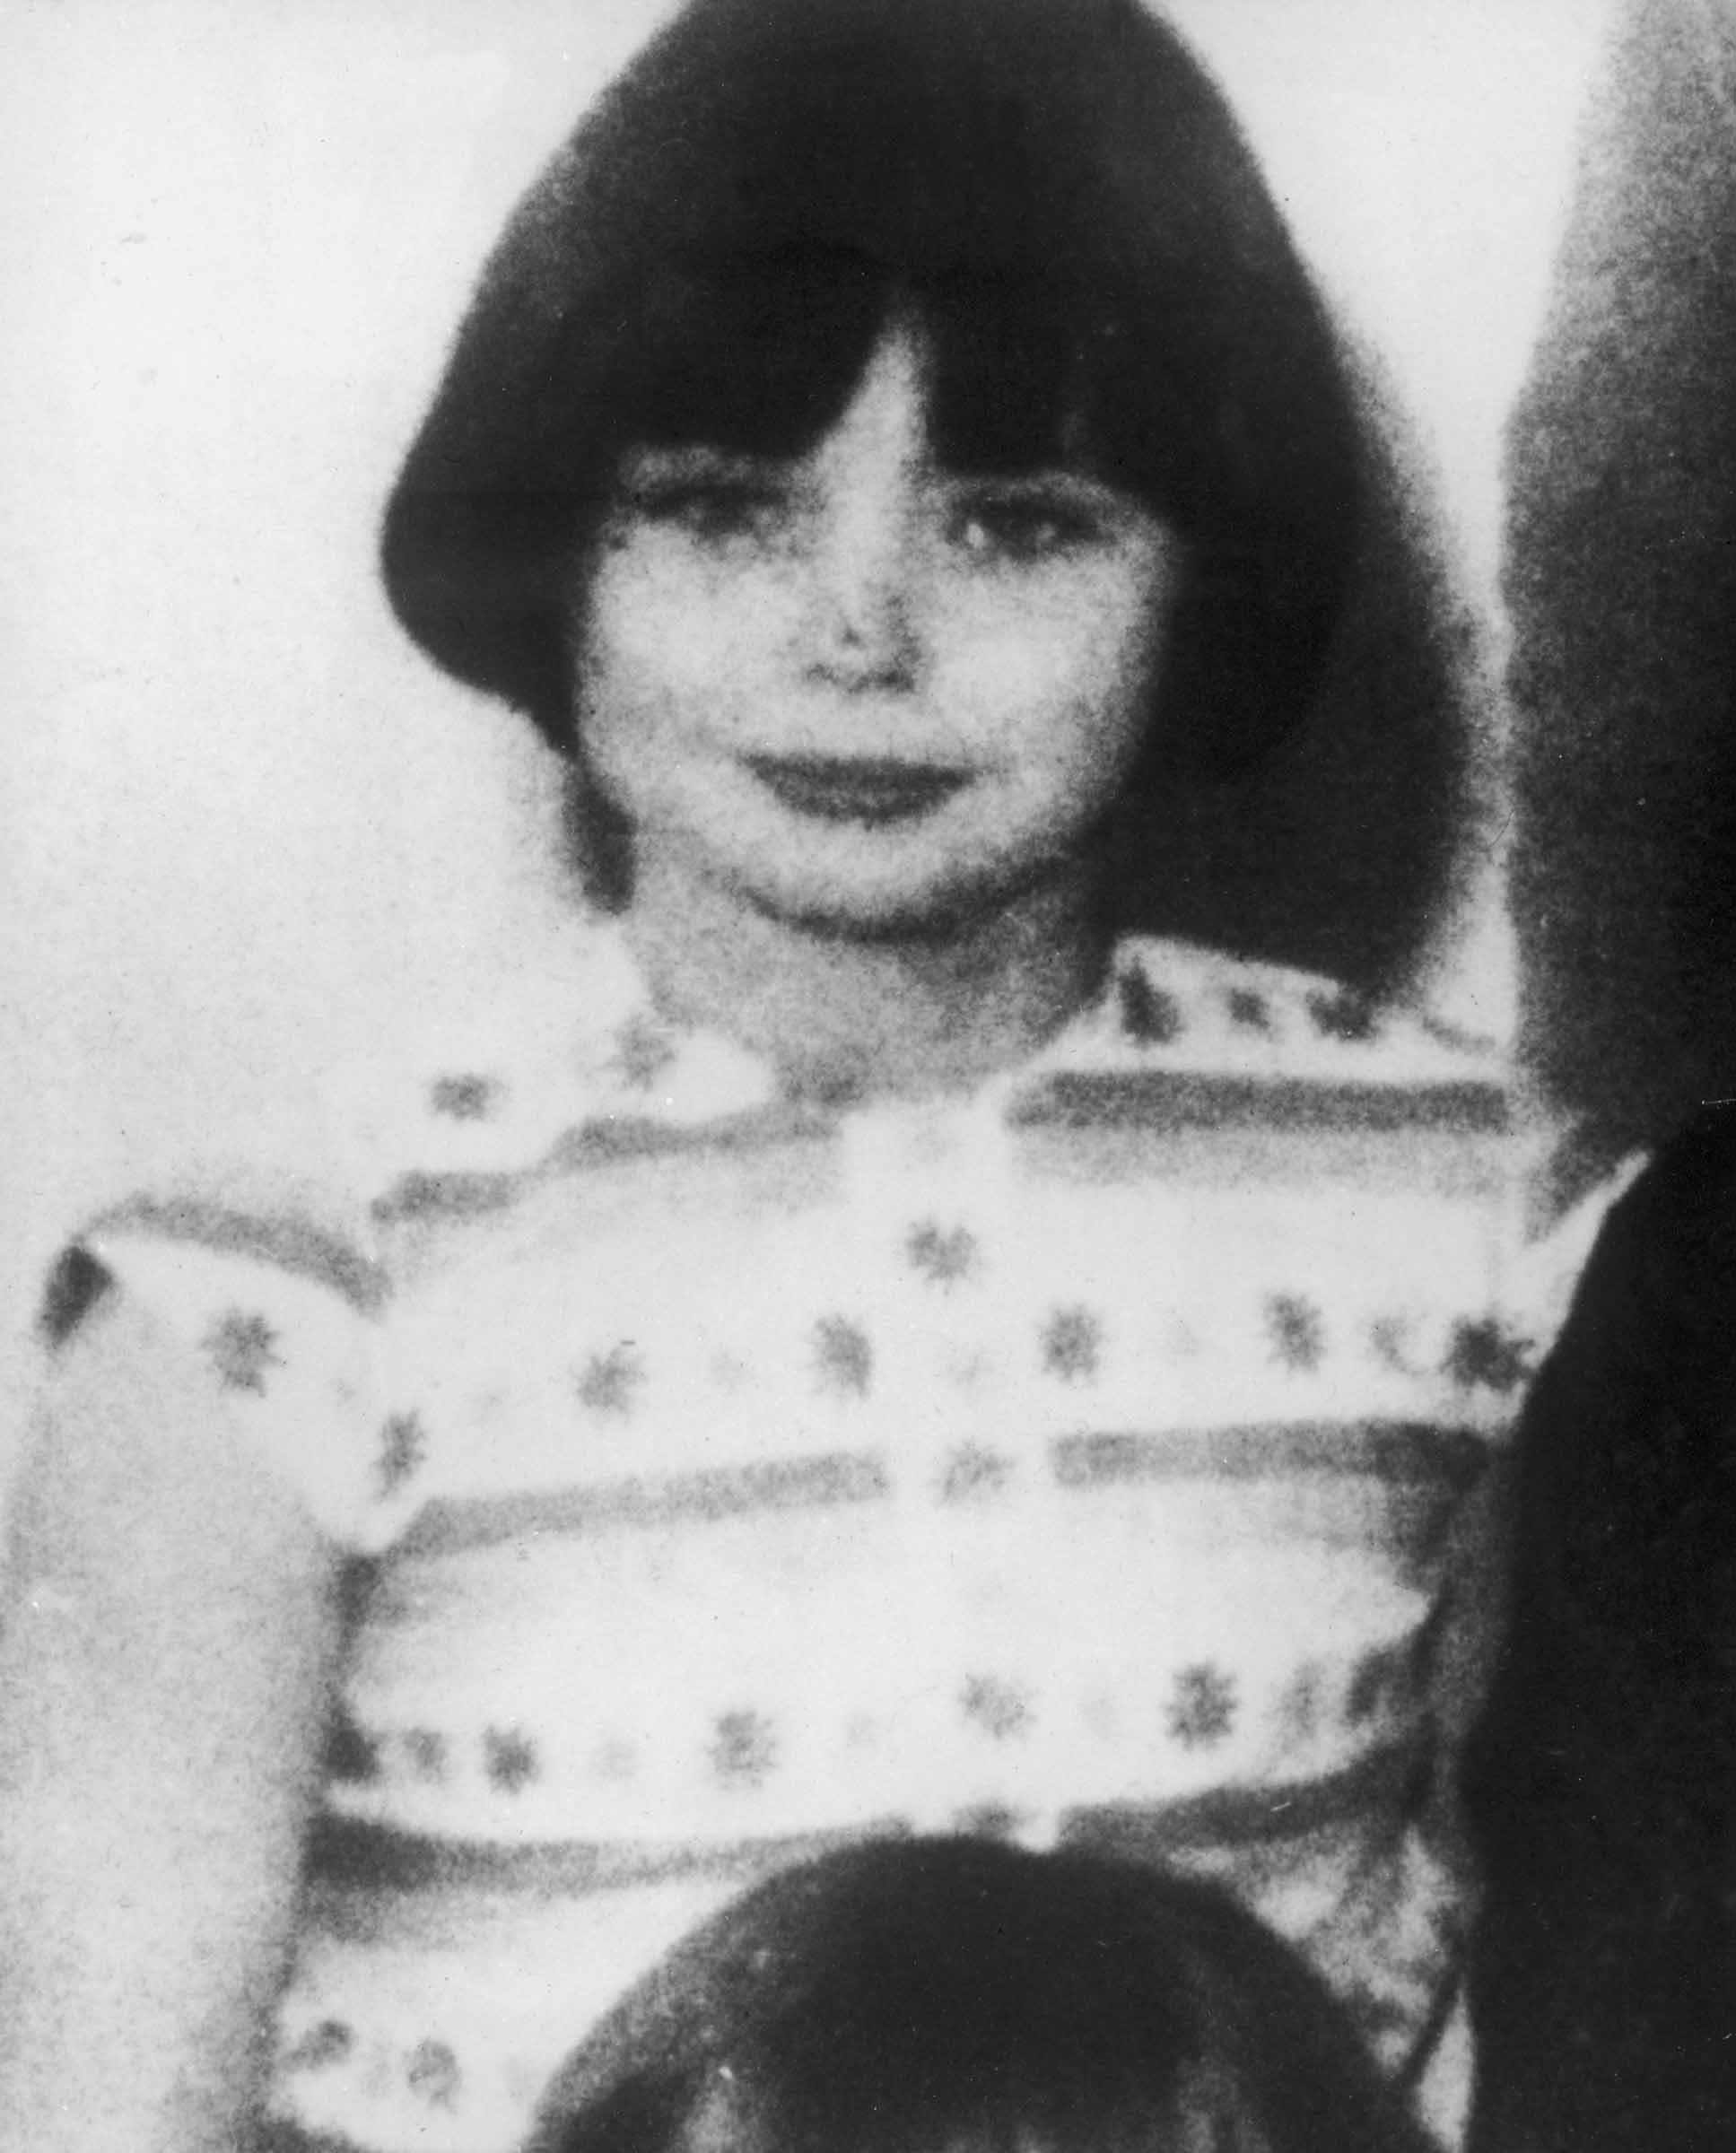 Who was Mary Bell? Was she a murderer or a victim? Film Daily